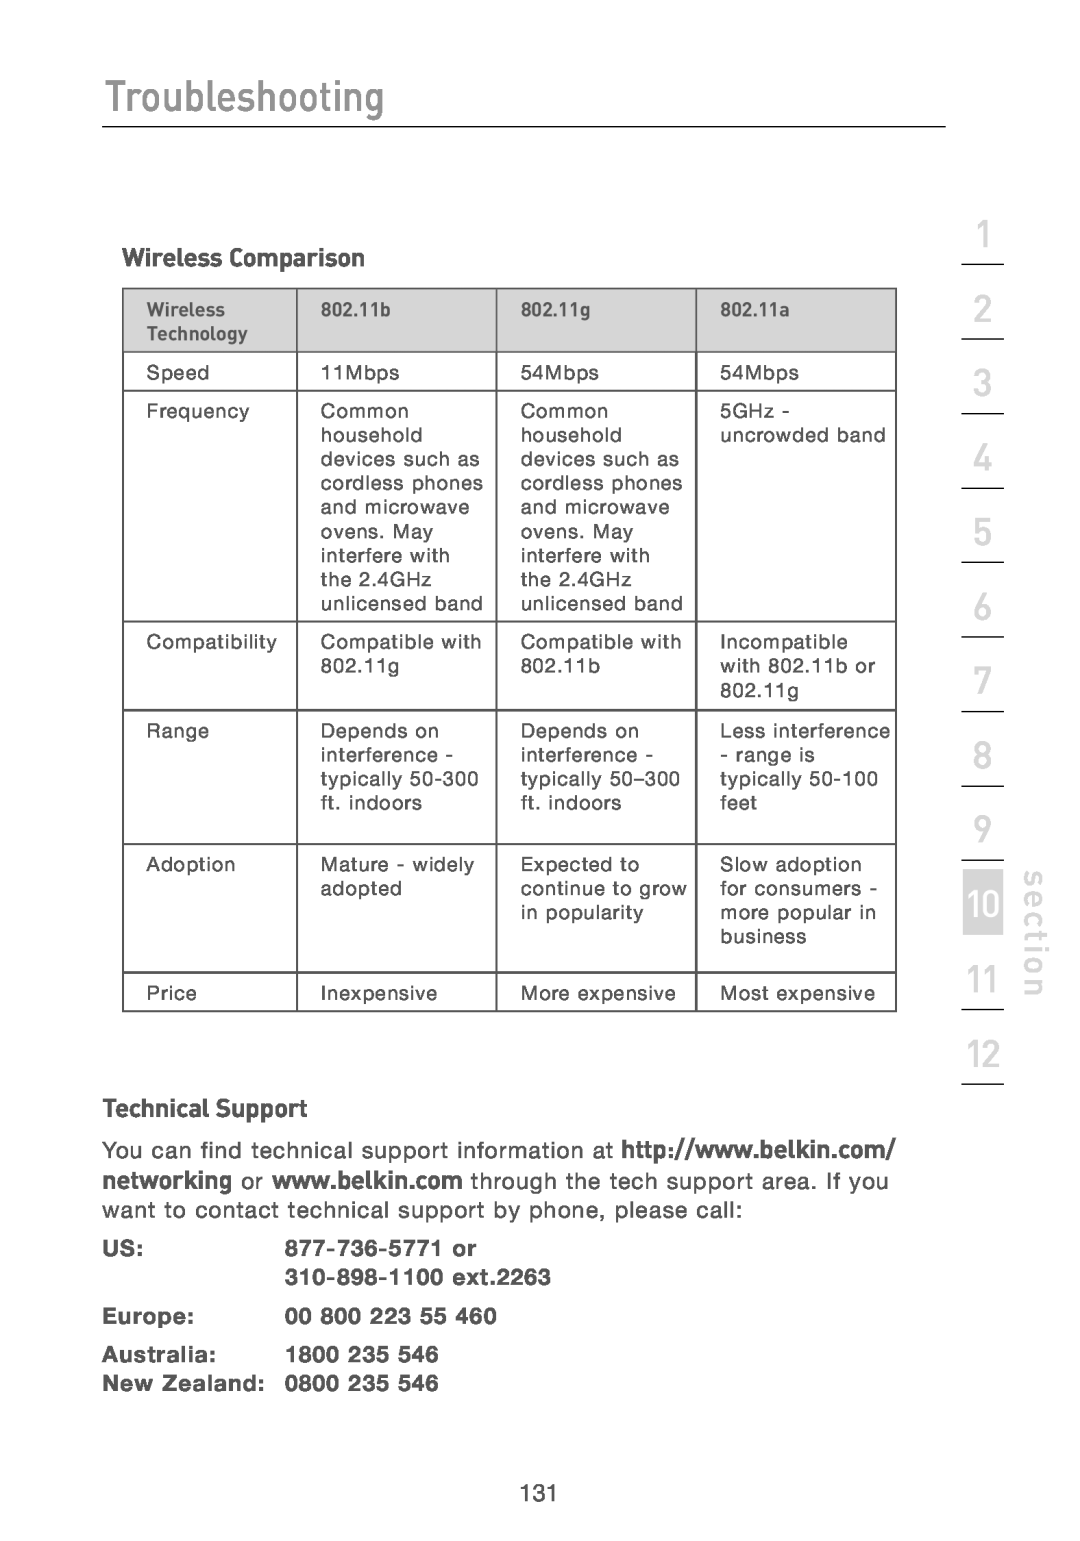 Belkin F5D7230AU4P Wireless Comparison, Technical Support, Troubleshooting, section, Europe, 00 800 223 55, Australia 